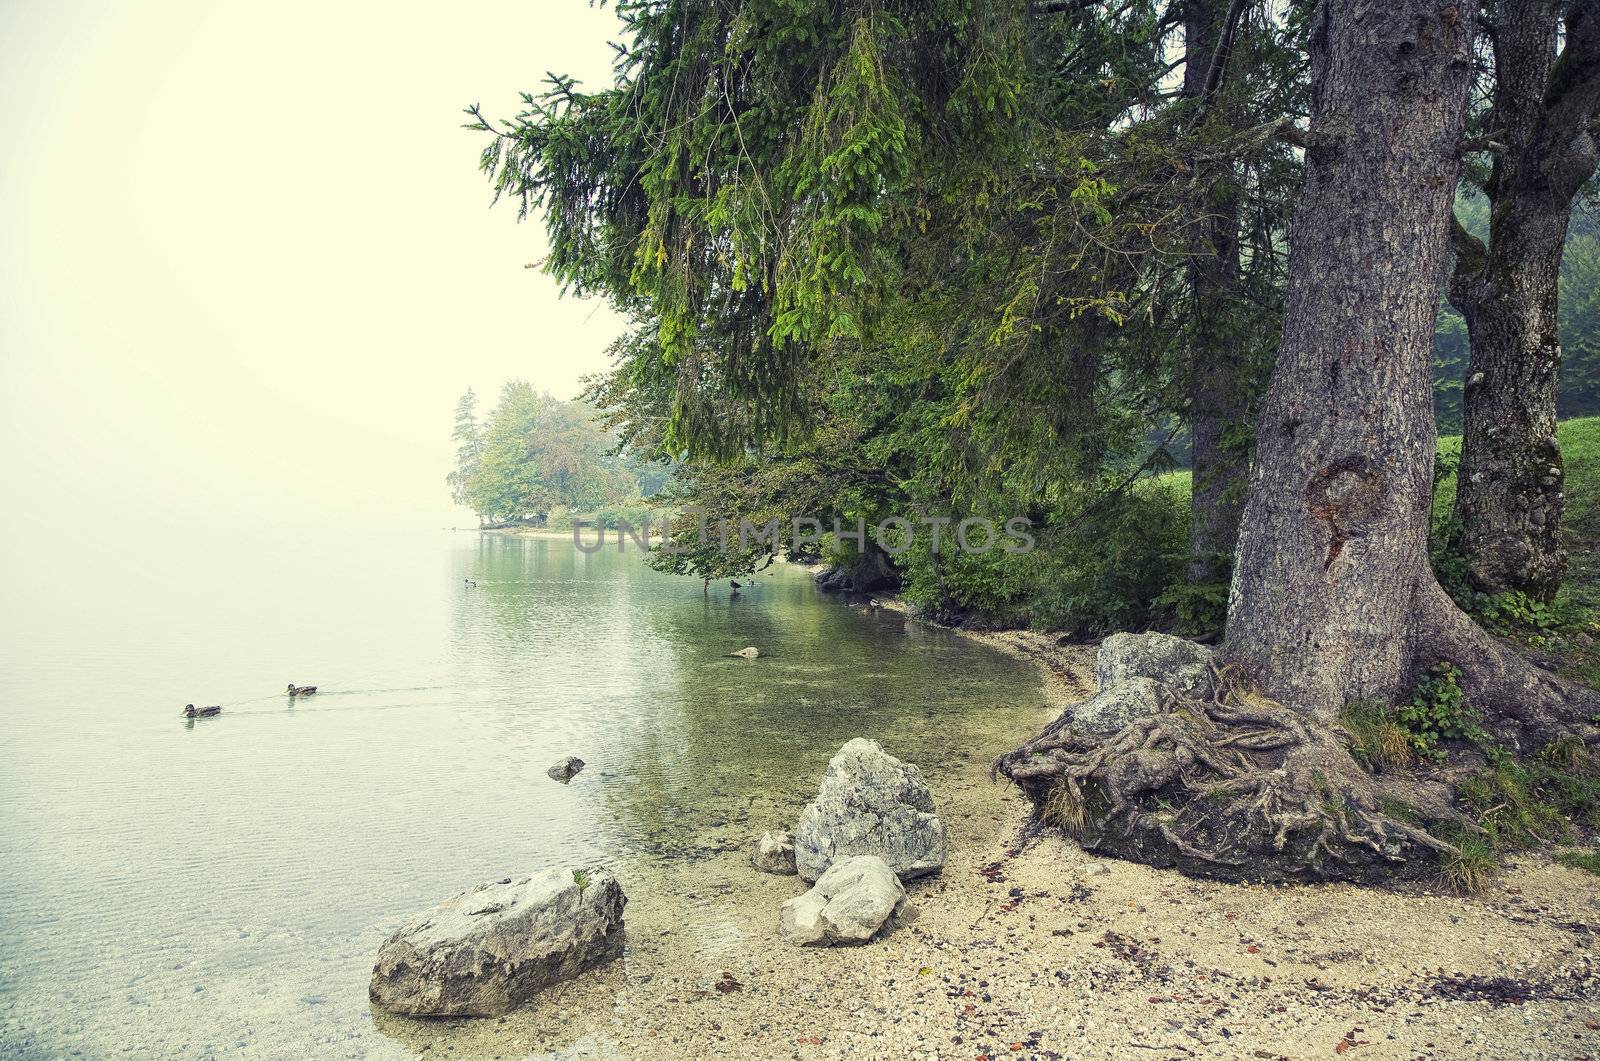 Foggy morning by Lake Bohinj in the Slovenian Alps. Space for text.